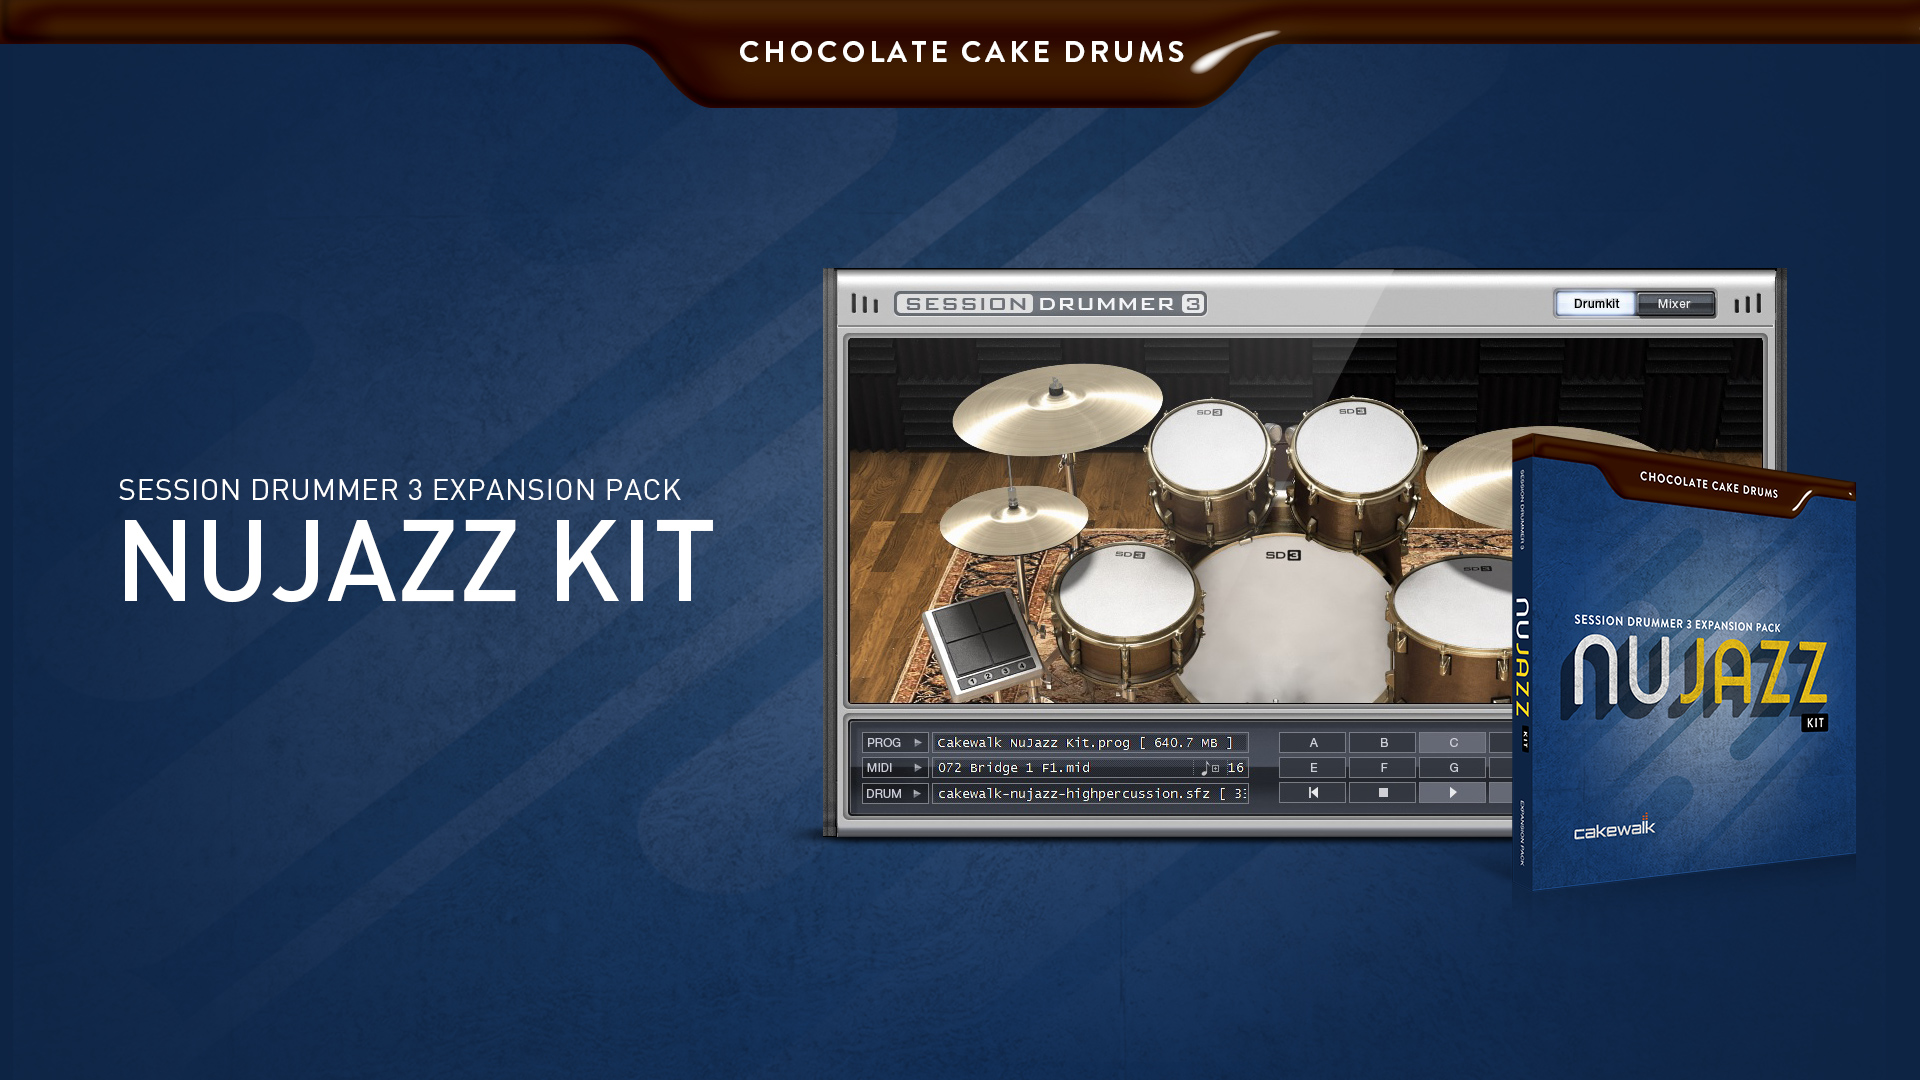 Chocolate Cake Drums: NuJazz Kit - For Session Drummer 3 Featured Screenshot #1